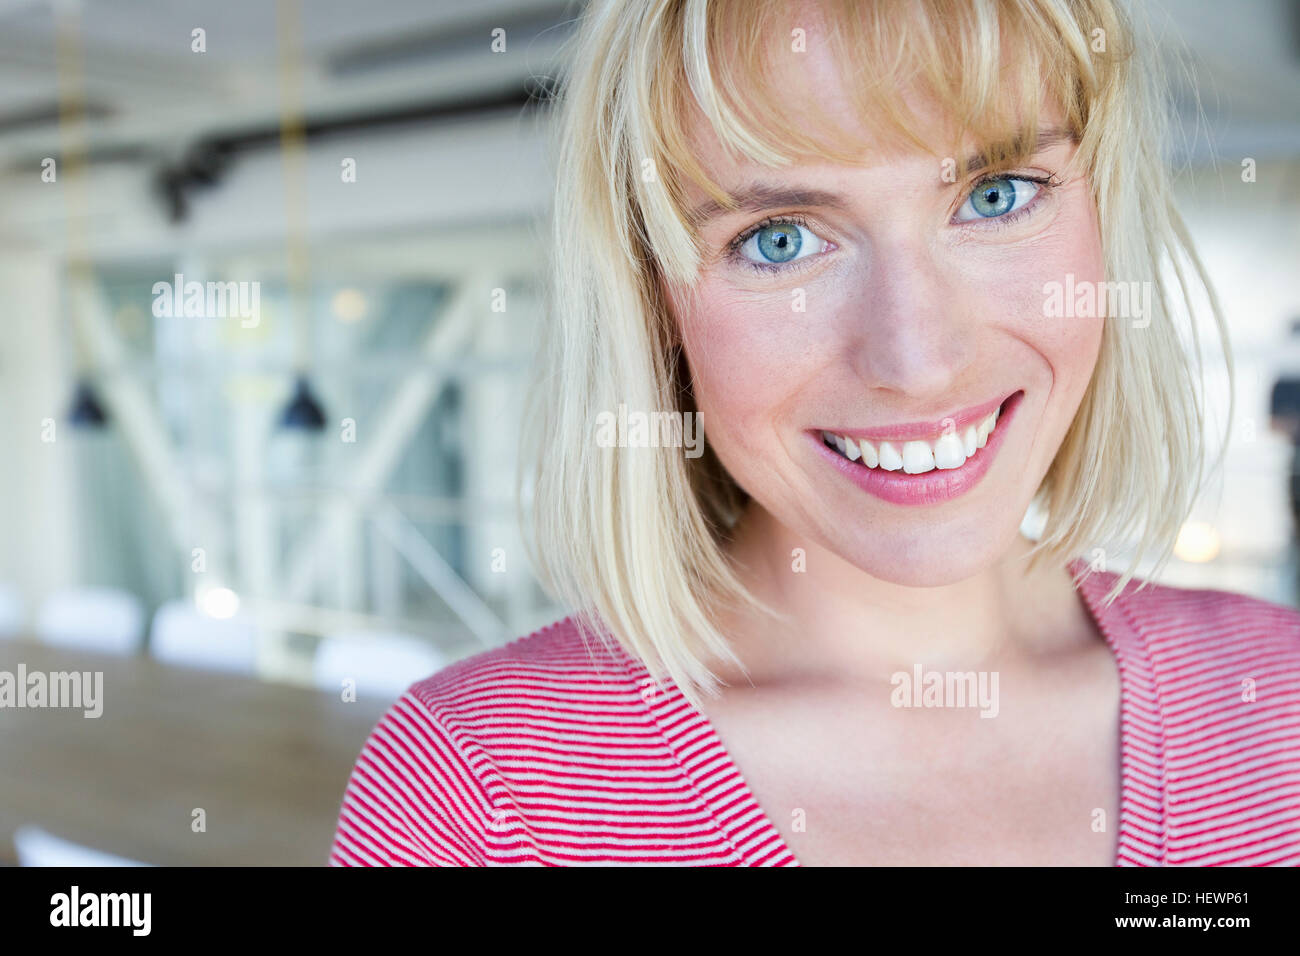 Portrait of blonde haired woman looking at camera smiling Stock Photo